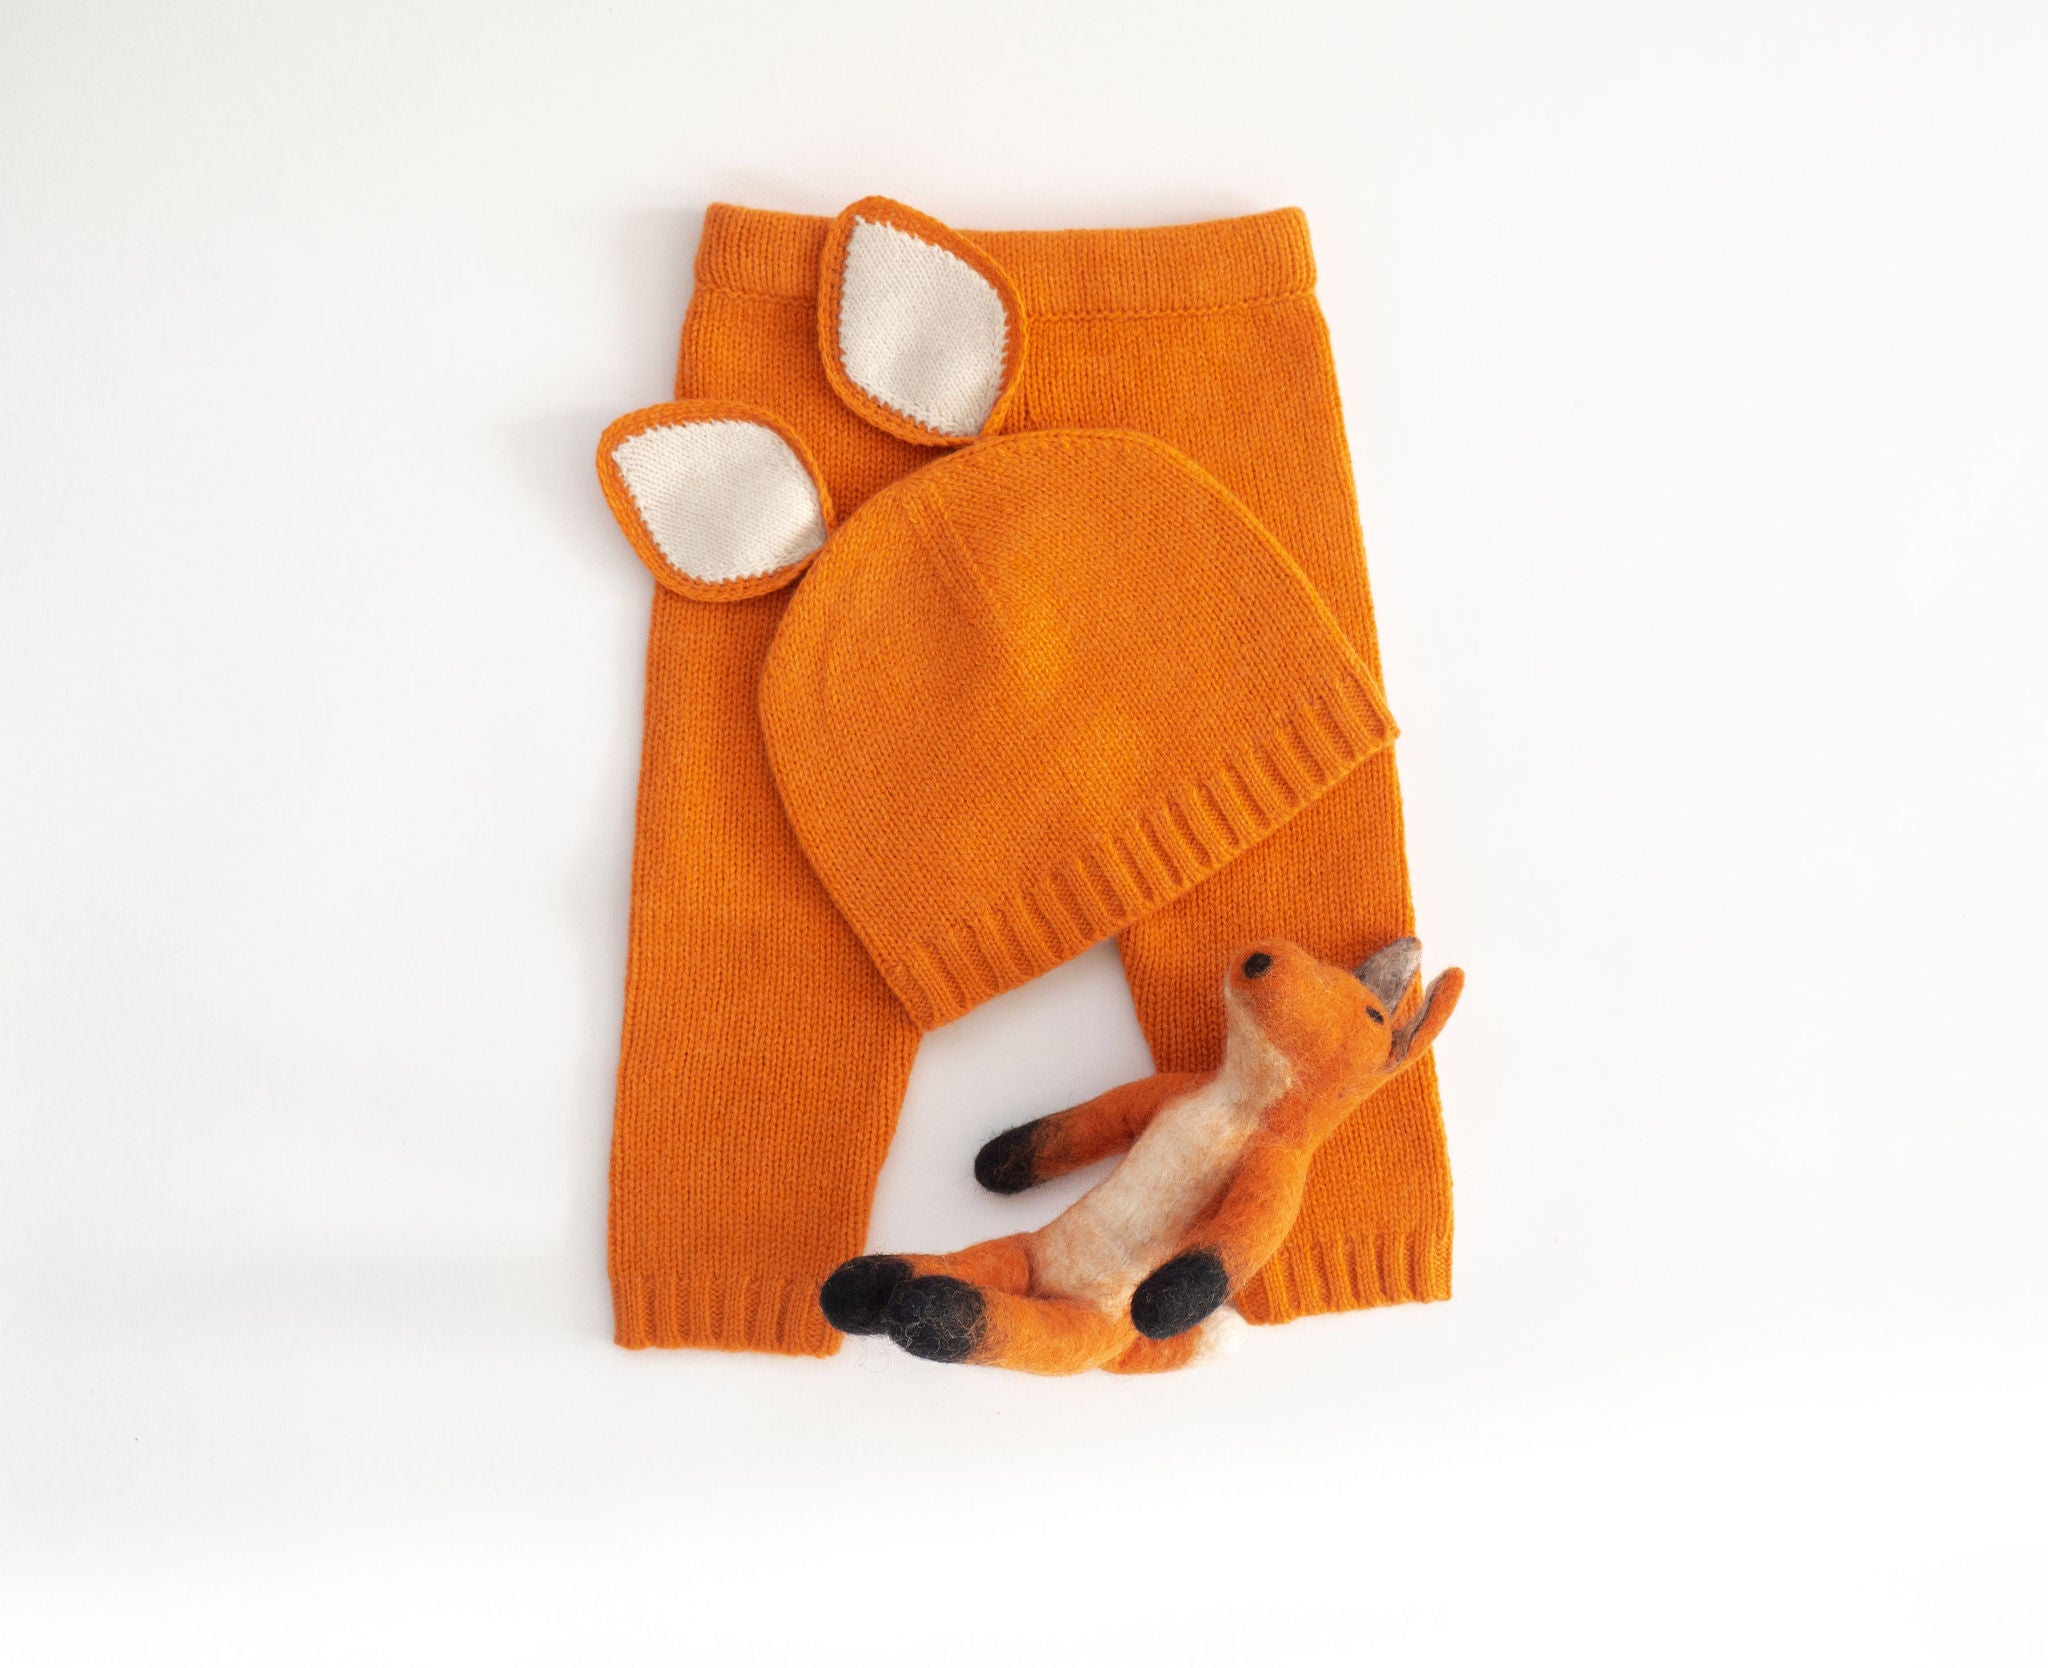 Fox baby gift, woodland baby gift, baby knitwear